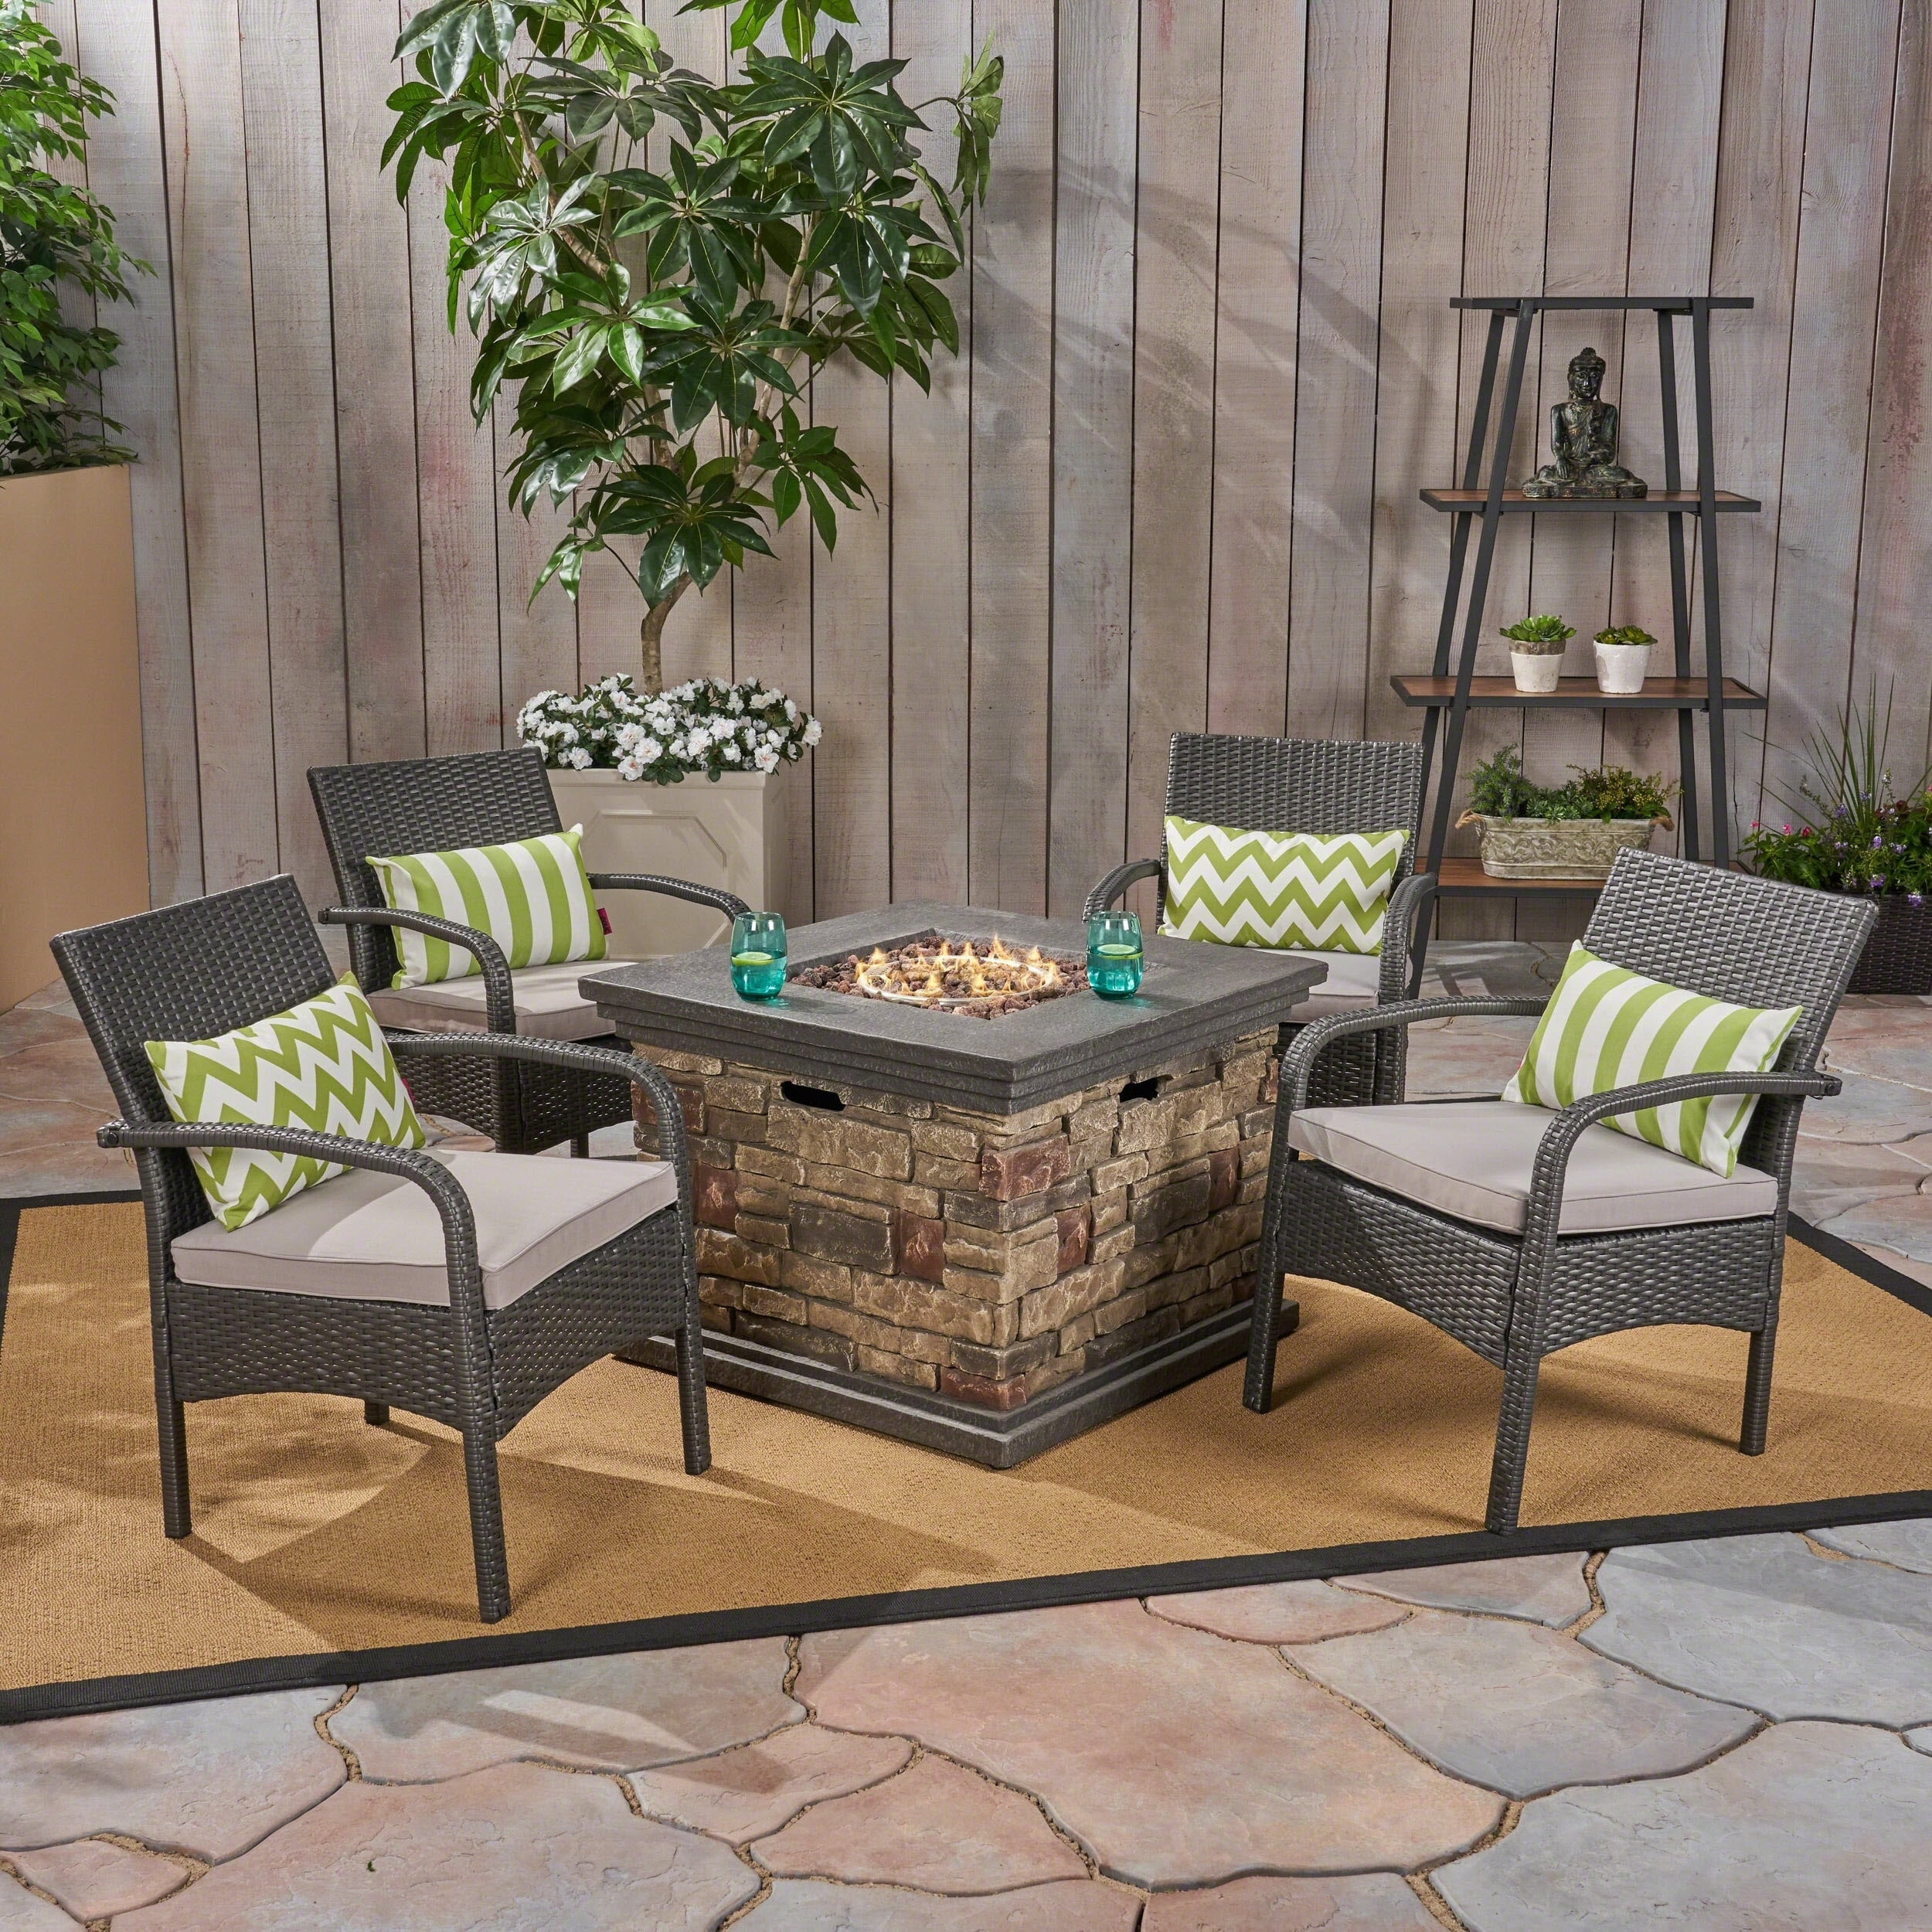 Christopher Knight Home Cordoba Outdoor, Wicker Fire Pit Chairs